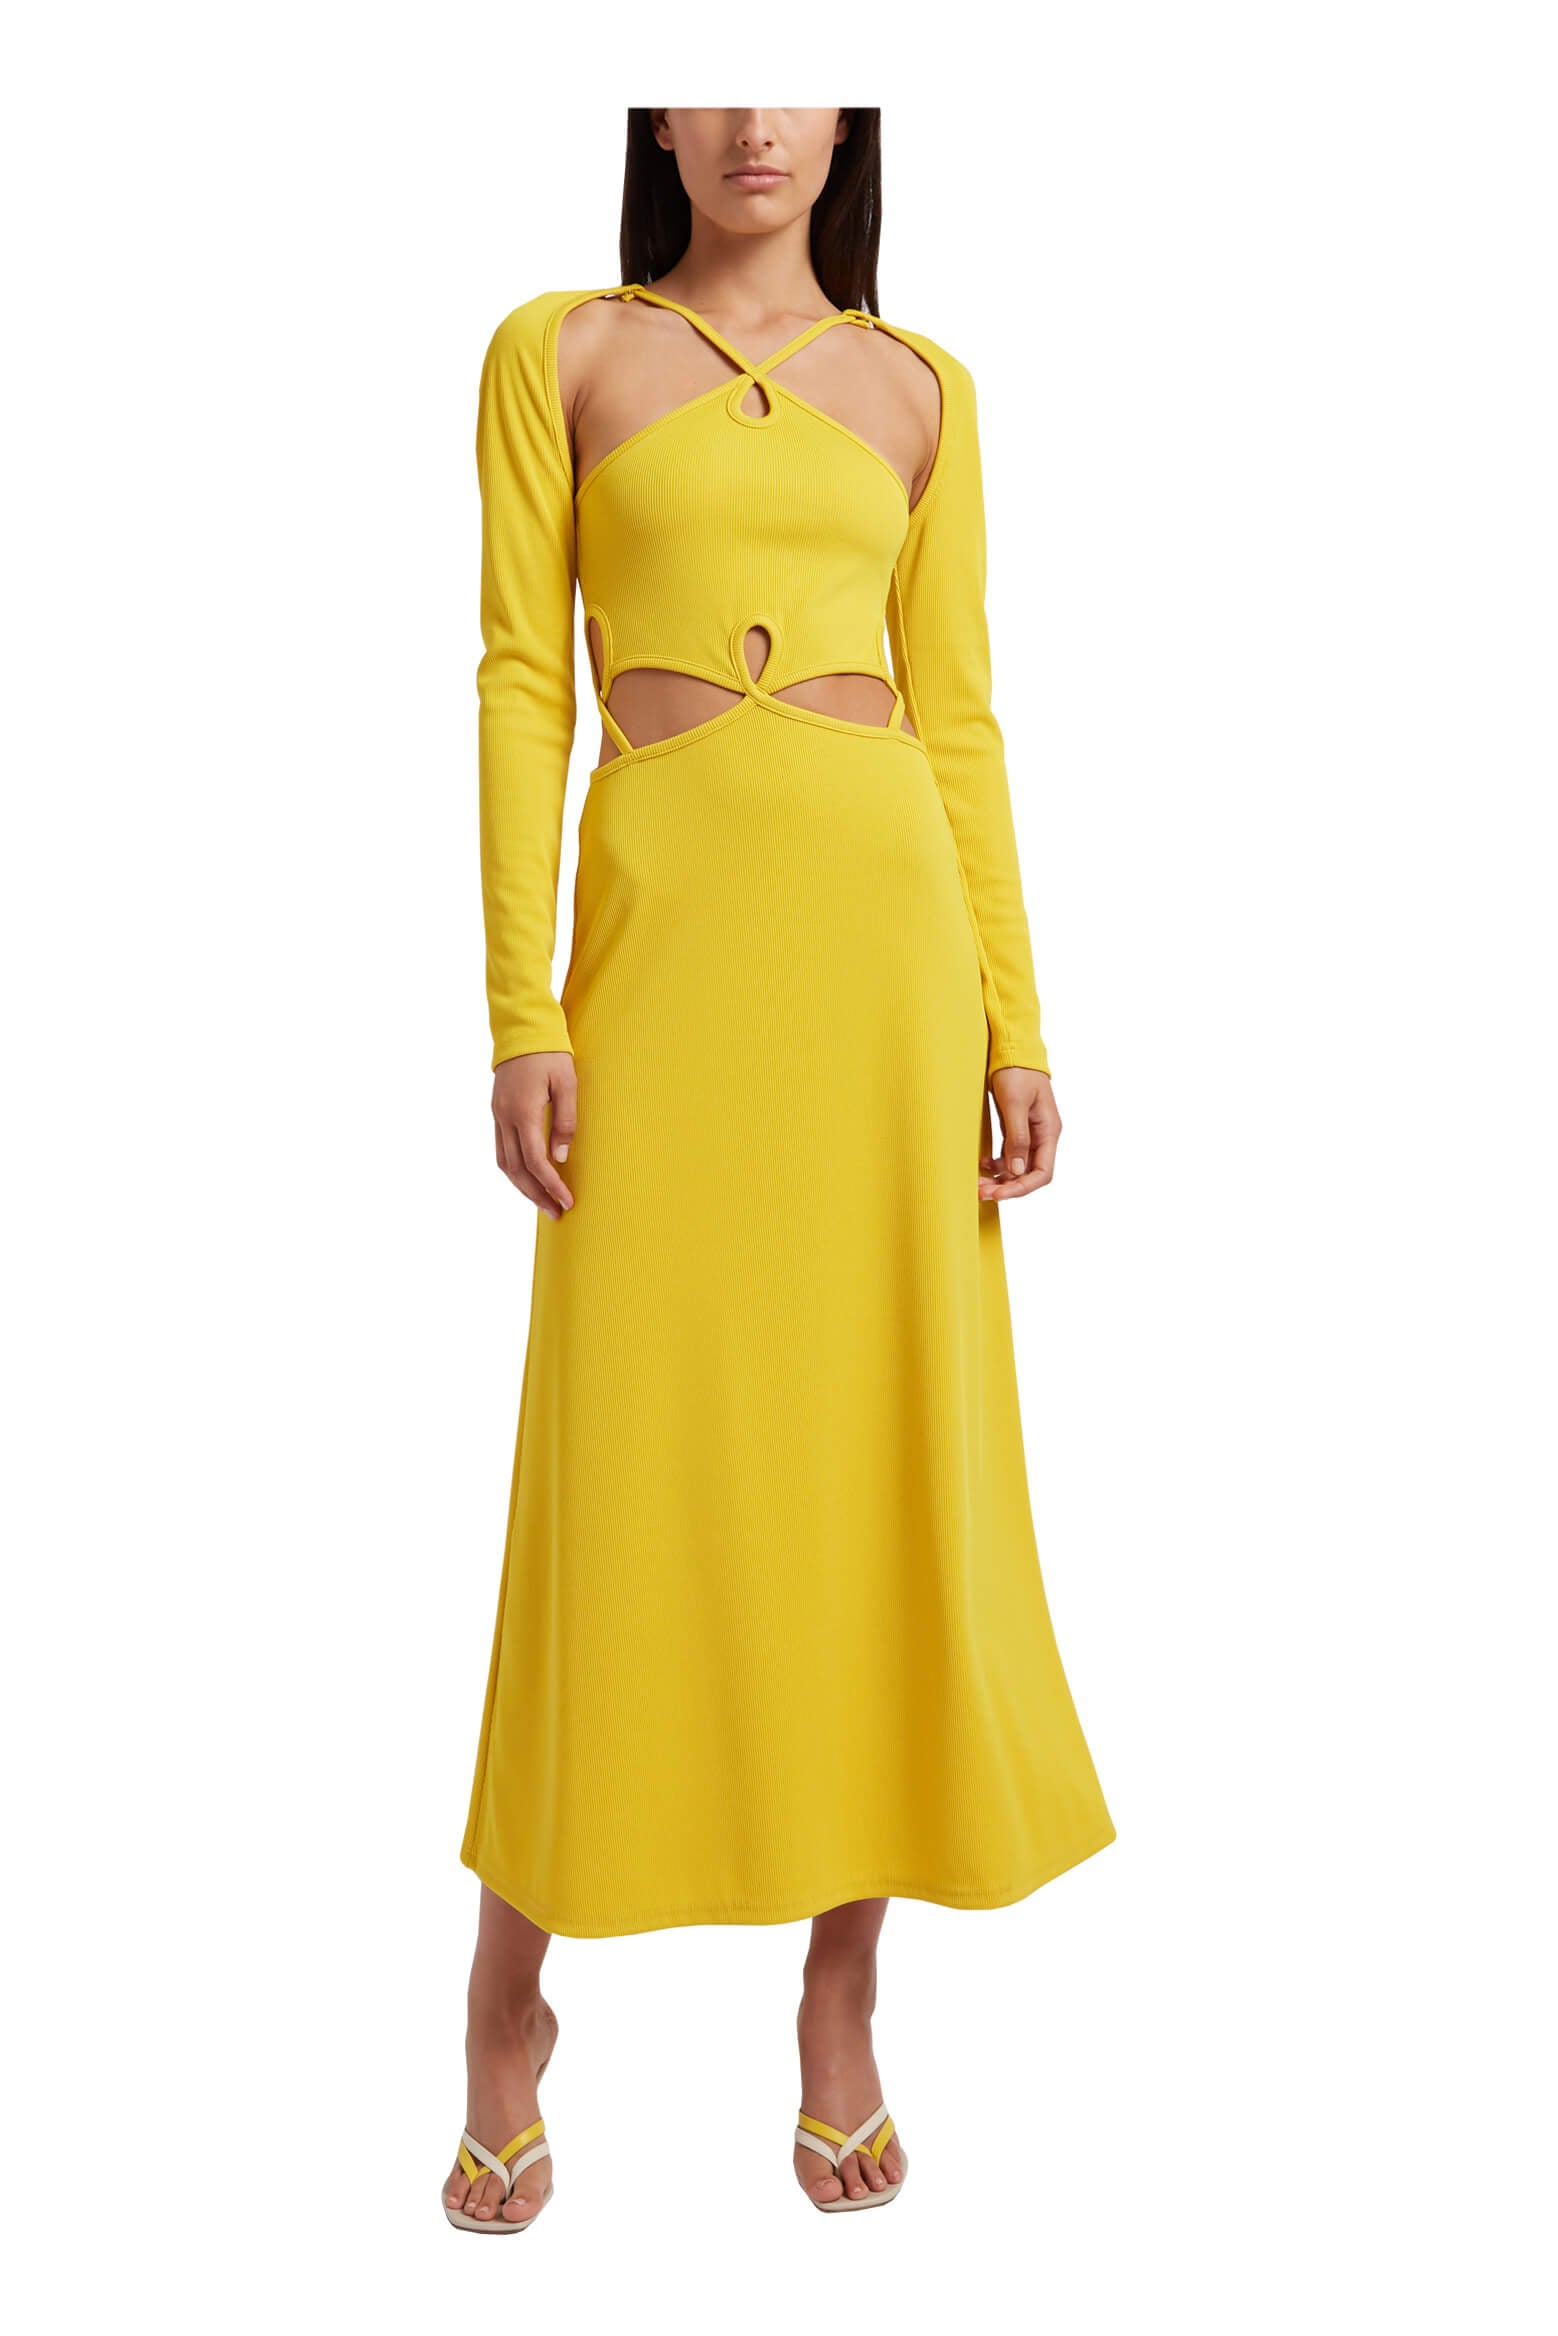 Christopher Esber Loophole Cutaway Long Sleeve Dress in Solace Yellow from The New Trend